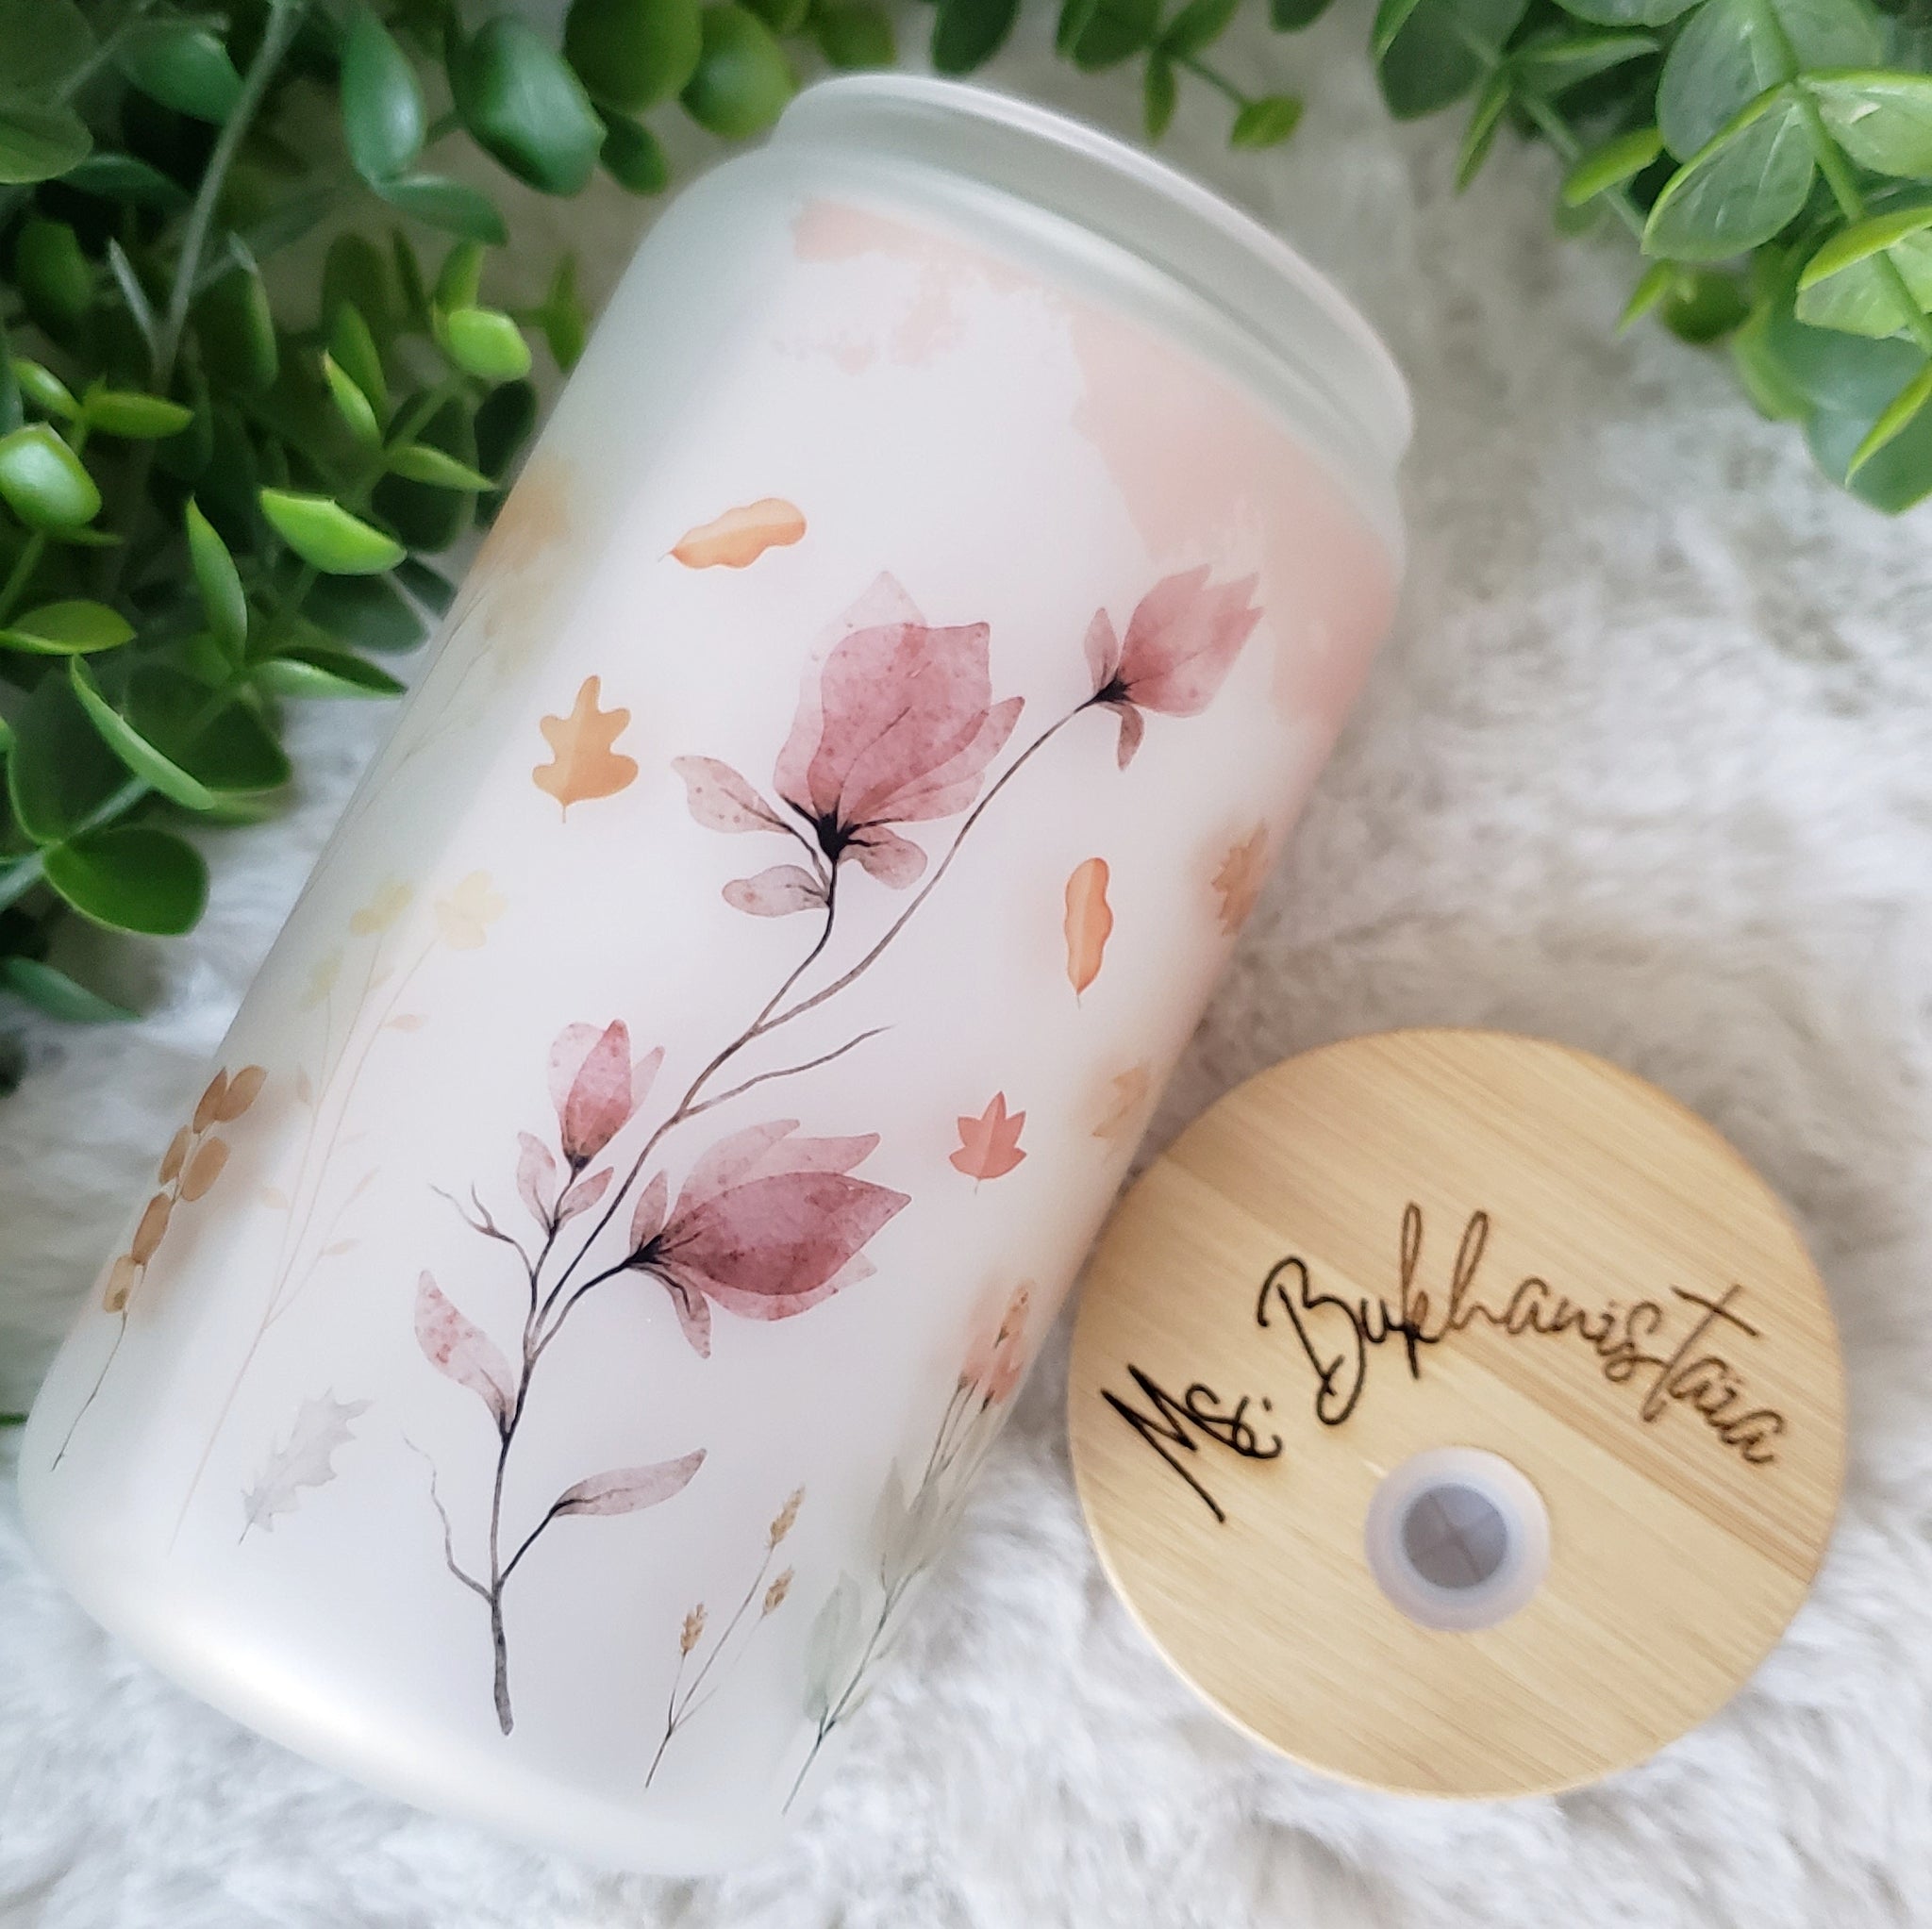 Starbucks floral iced coffee cup